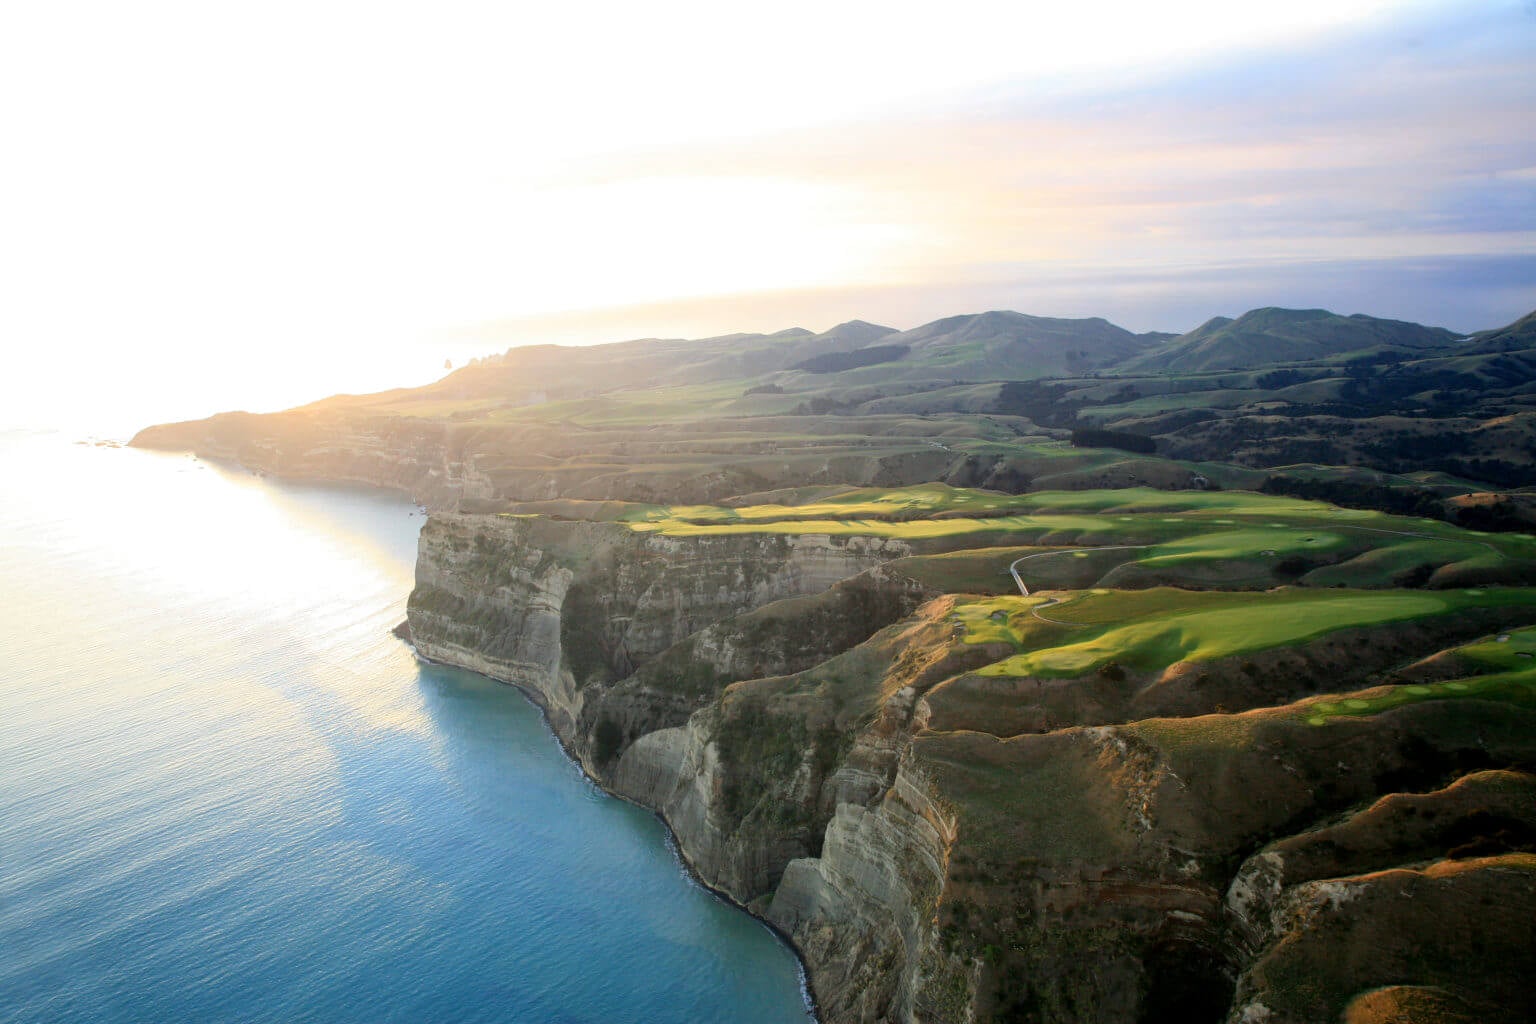 Cape Kidnappers golf course contrast with large cliff